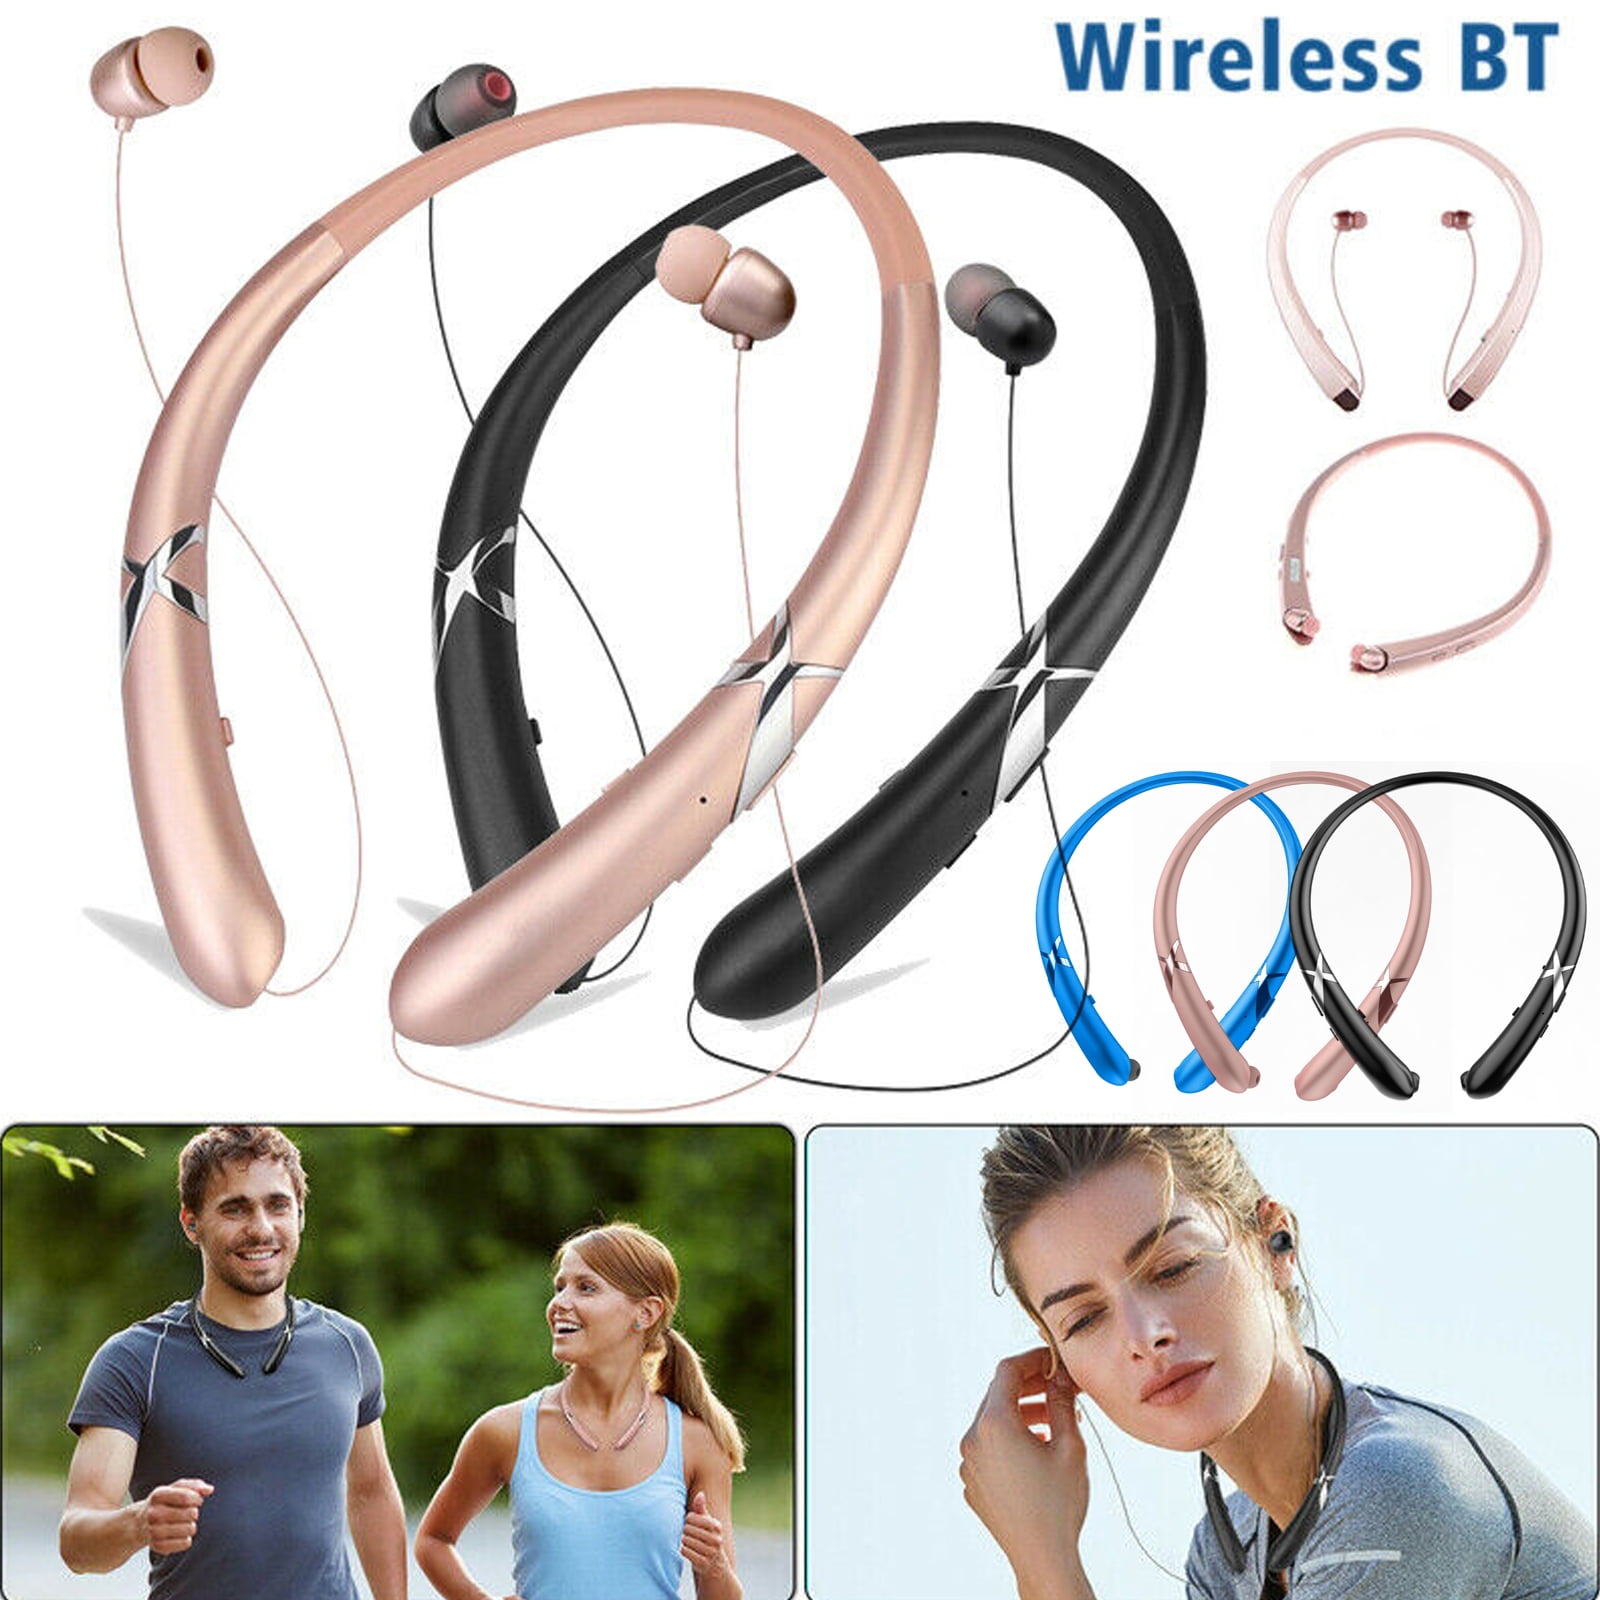 EEEKit Bluetooth Headphones Wireless Neckband Headset Sweatproof Foldable Earphones Bluetooth 5.0 Noise Cancelling Headset with Mic Retractable Earbud for iPhone 11 Android Cellphone Tablets TV